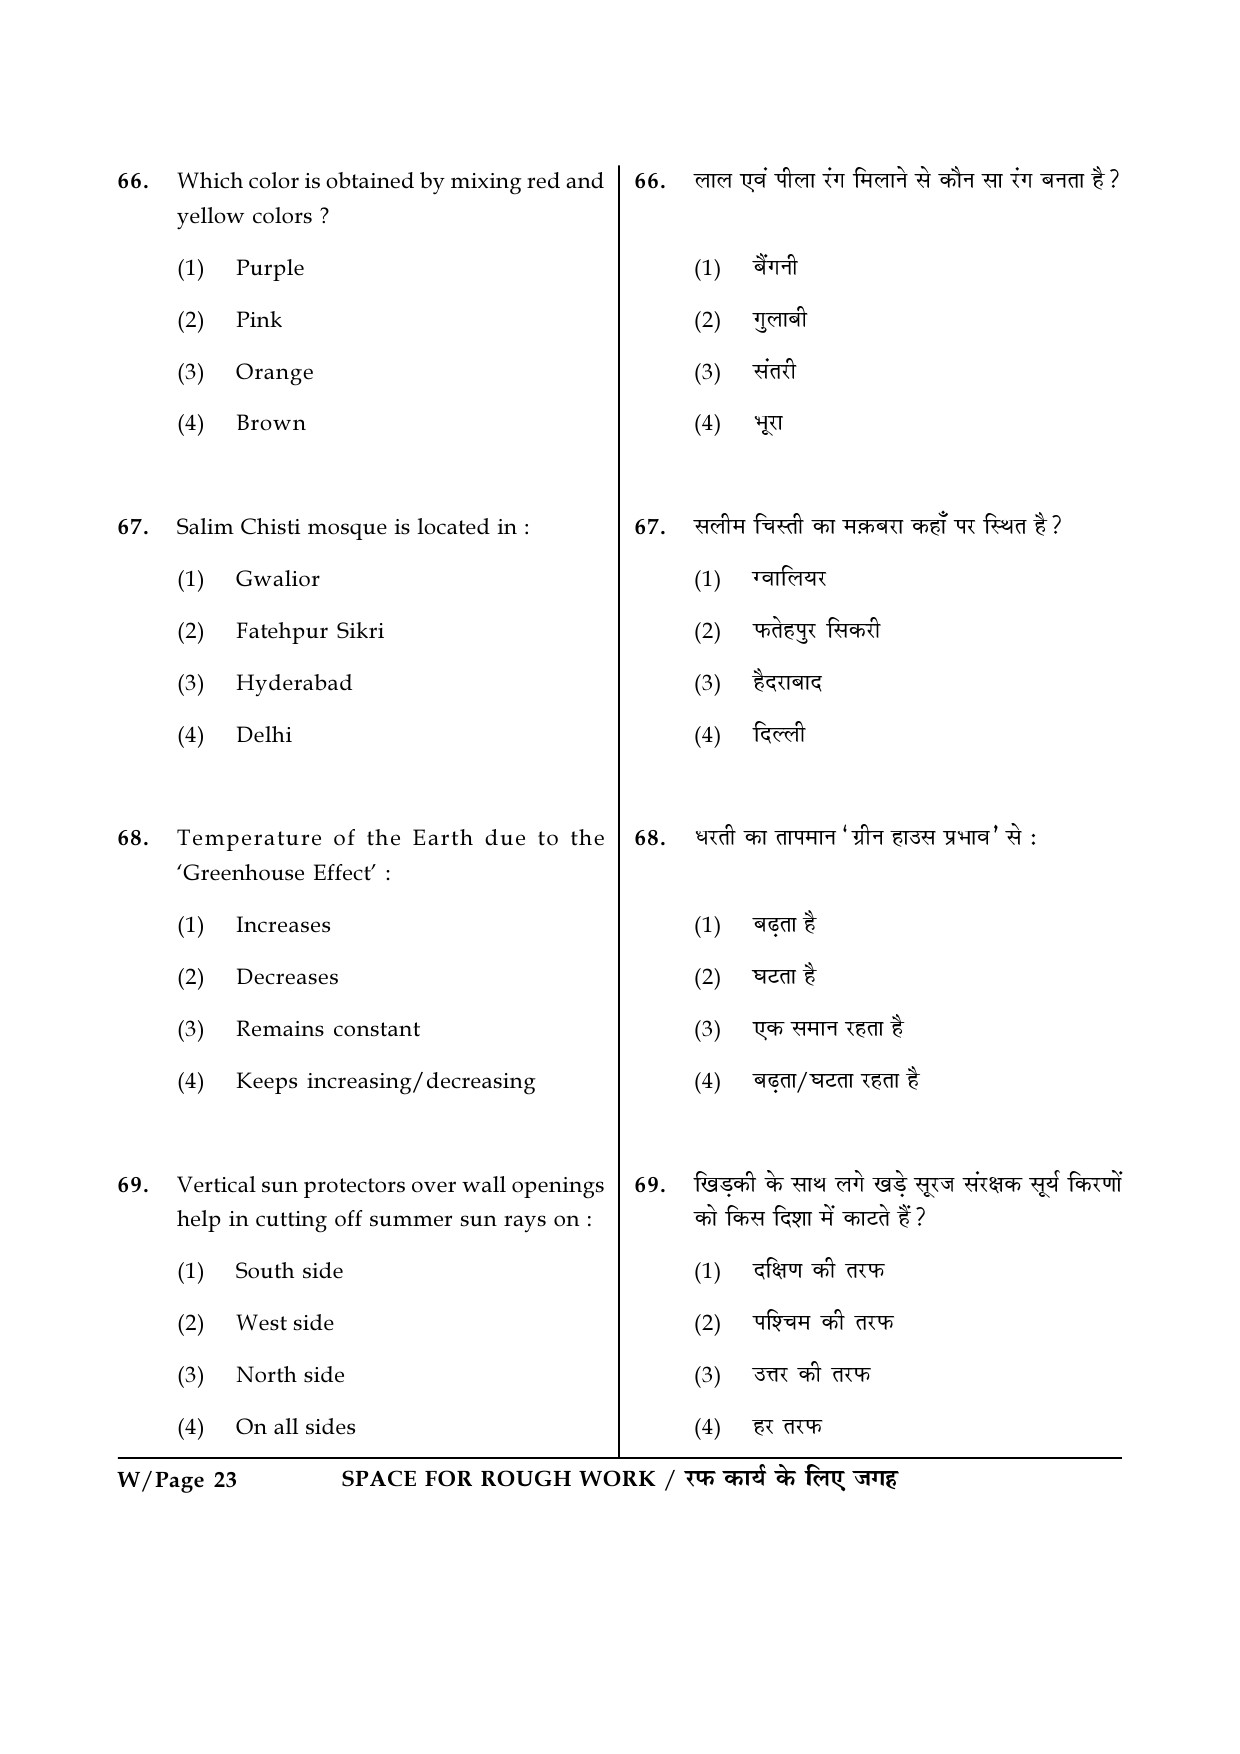 JEE Main Exam Question Paper 2017 Booklet W 23